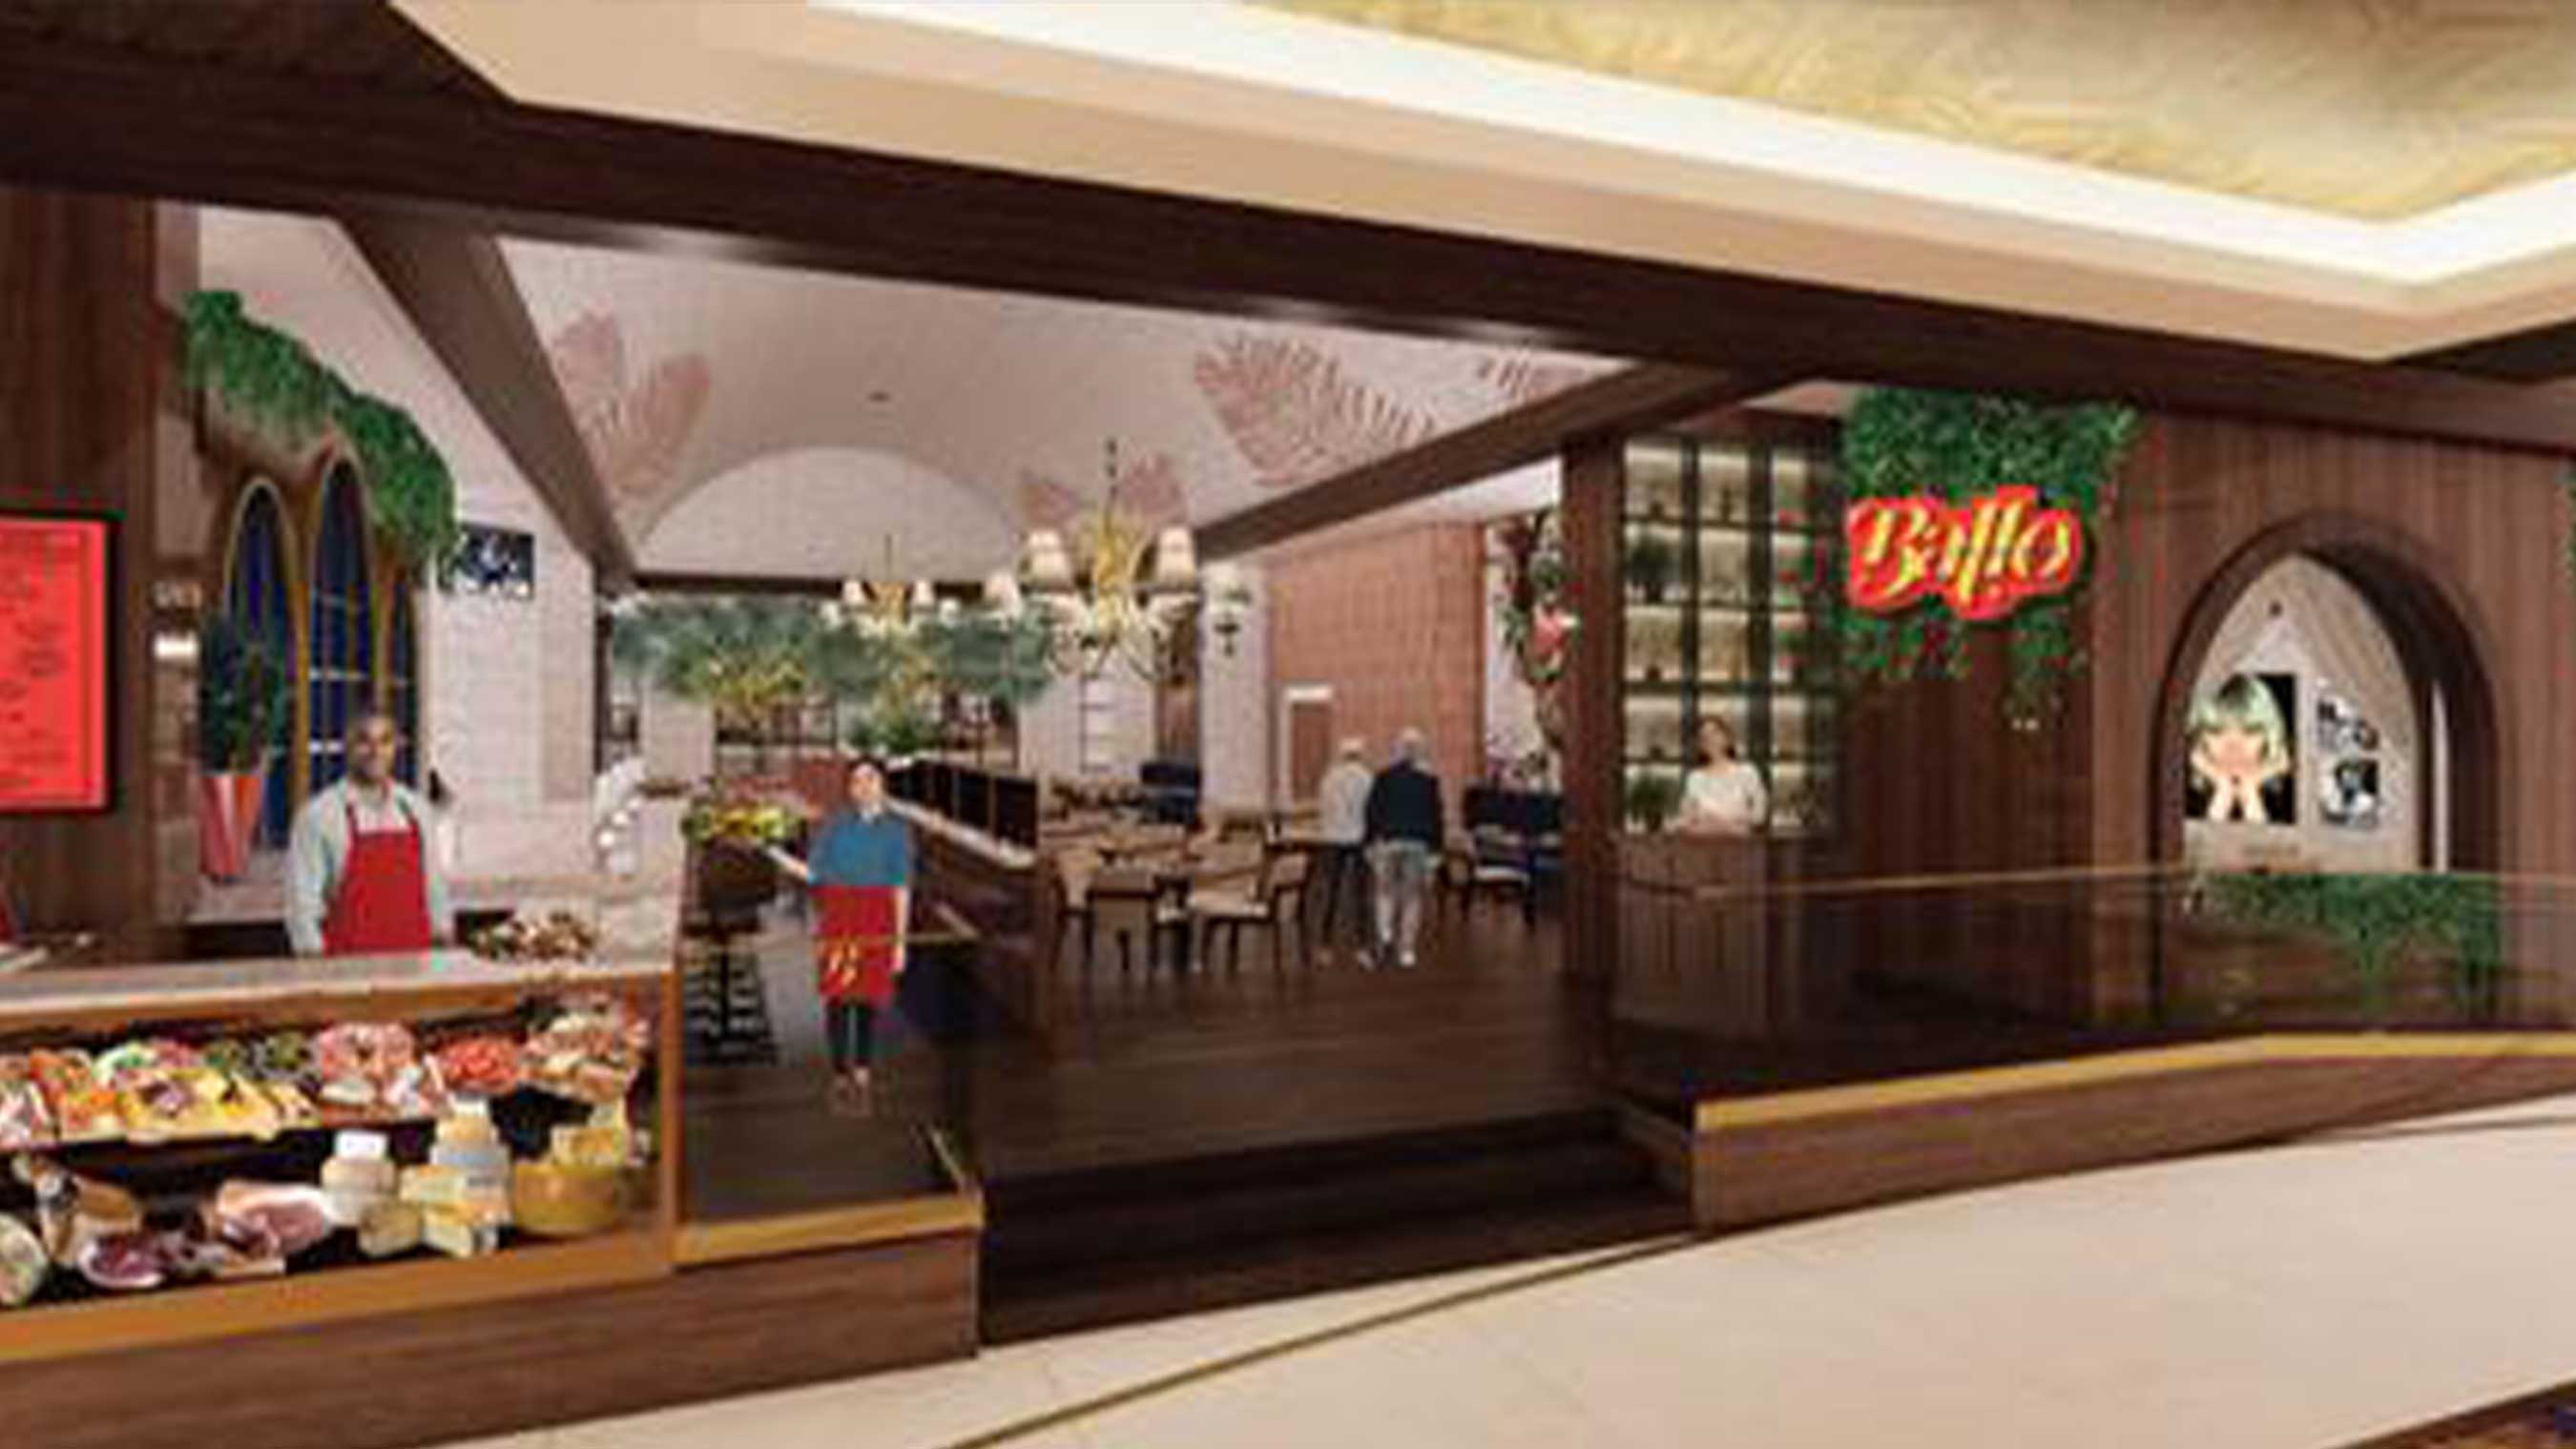 Rendering of Ballo, a new Italian dining concept from Chef Shawn McClain opening at SAHARA Las Vegas late 2021